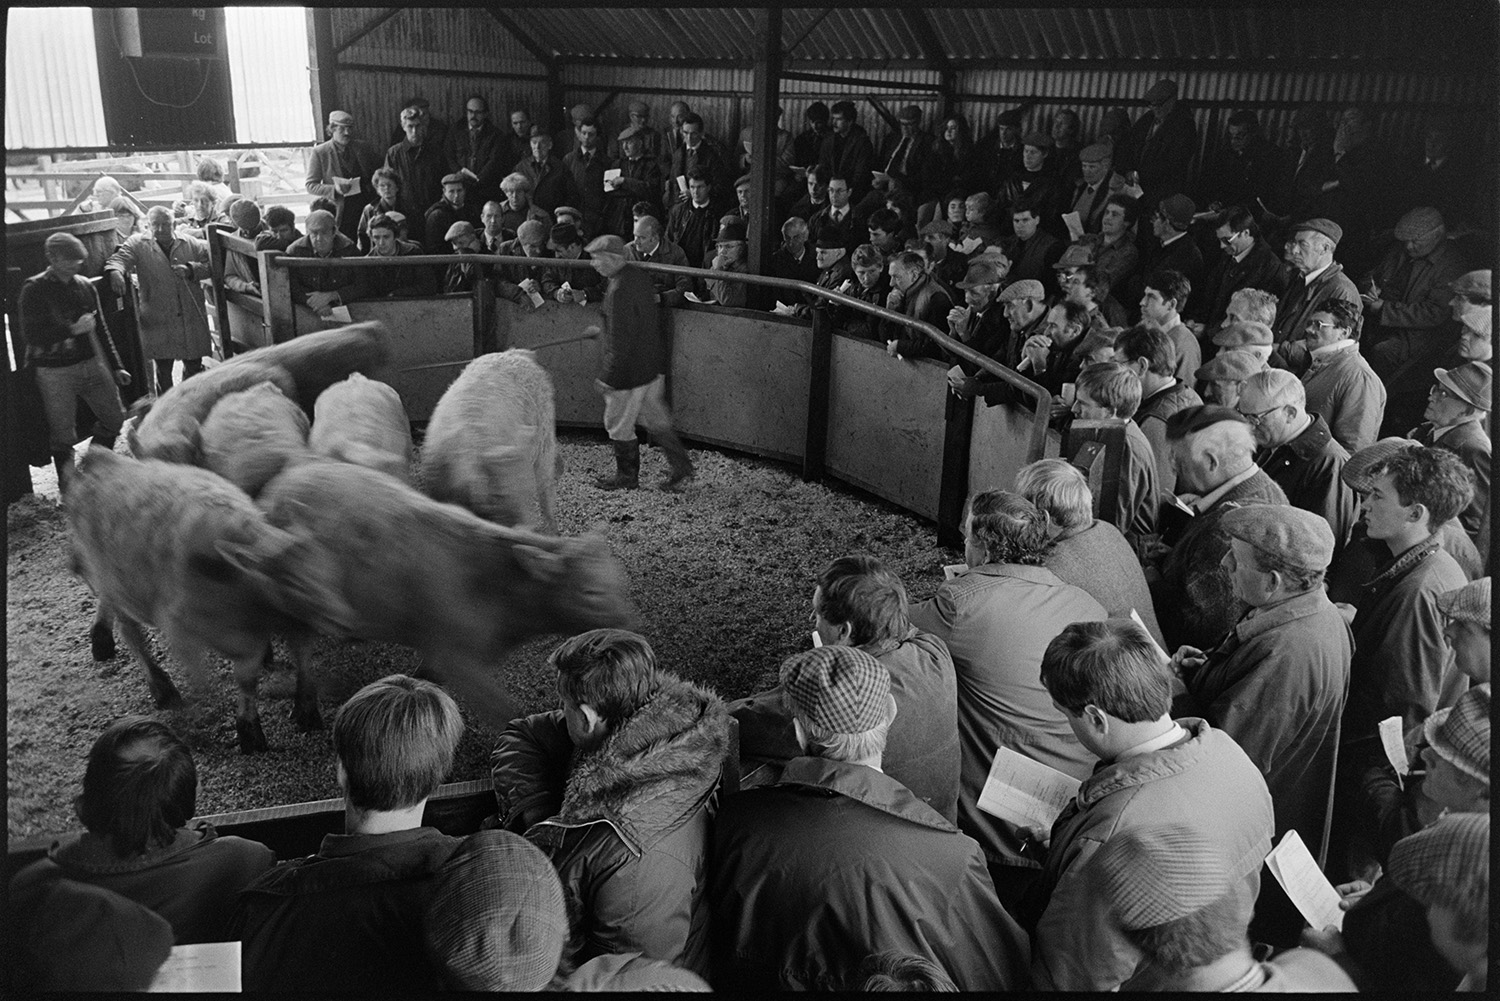 Ring at cattle market, farmers bidding. 
[Men bidding on cattle in a livestock ring at a cattle market near Wheddon Cross. Another man is parading the cattle around the ring.]